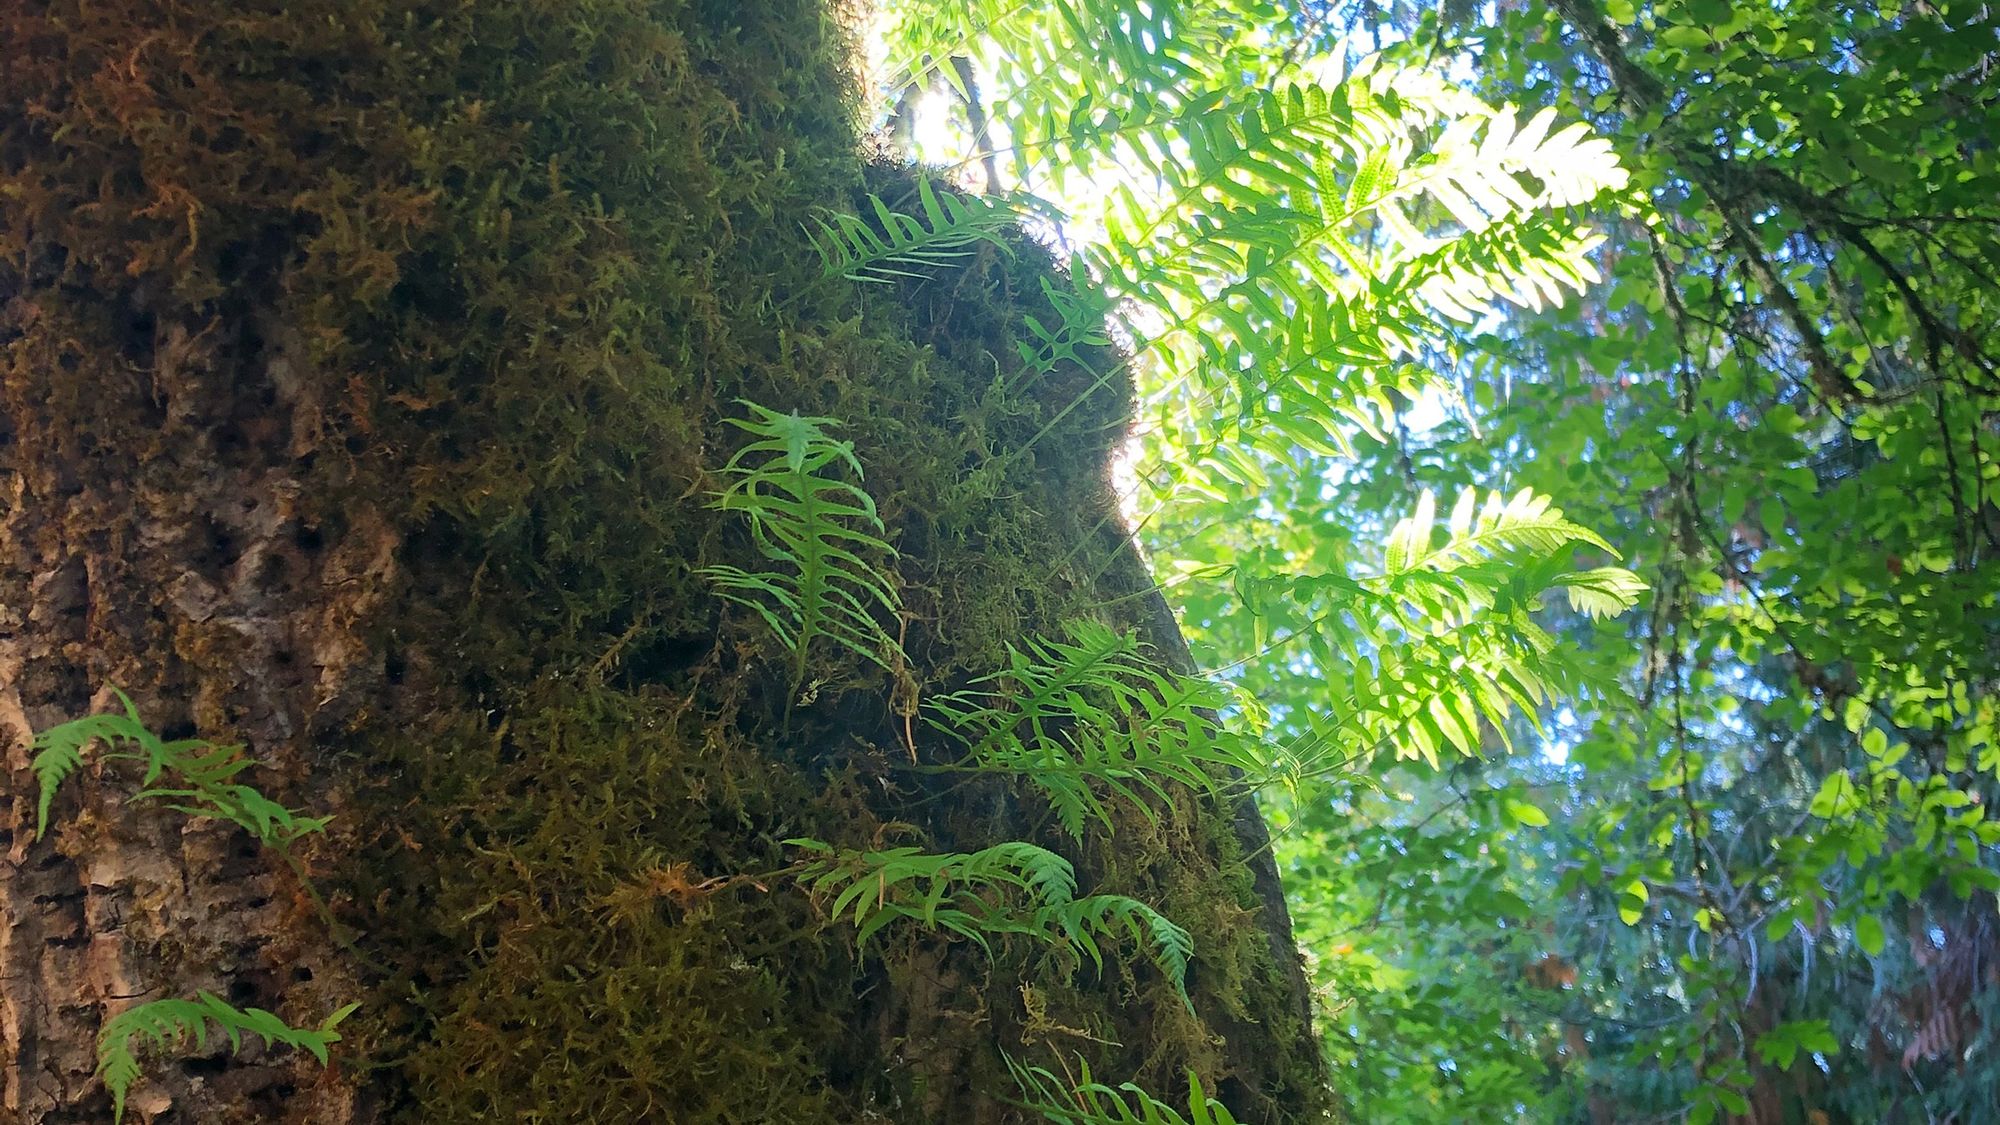 Ferns climbing a tree trunk covered in moss, with sunlight shining through their leaves, creating a brilliant sense of beauty